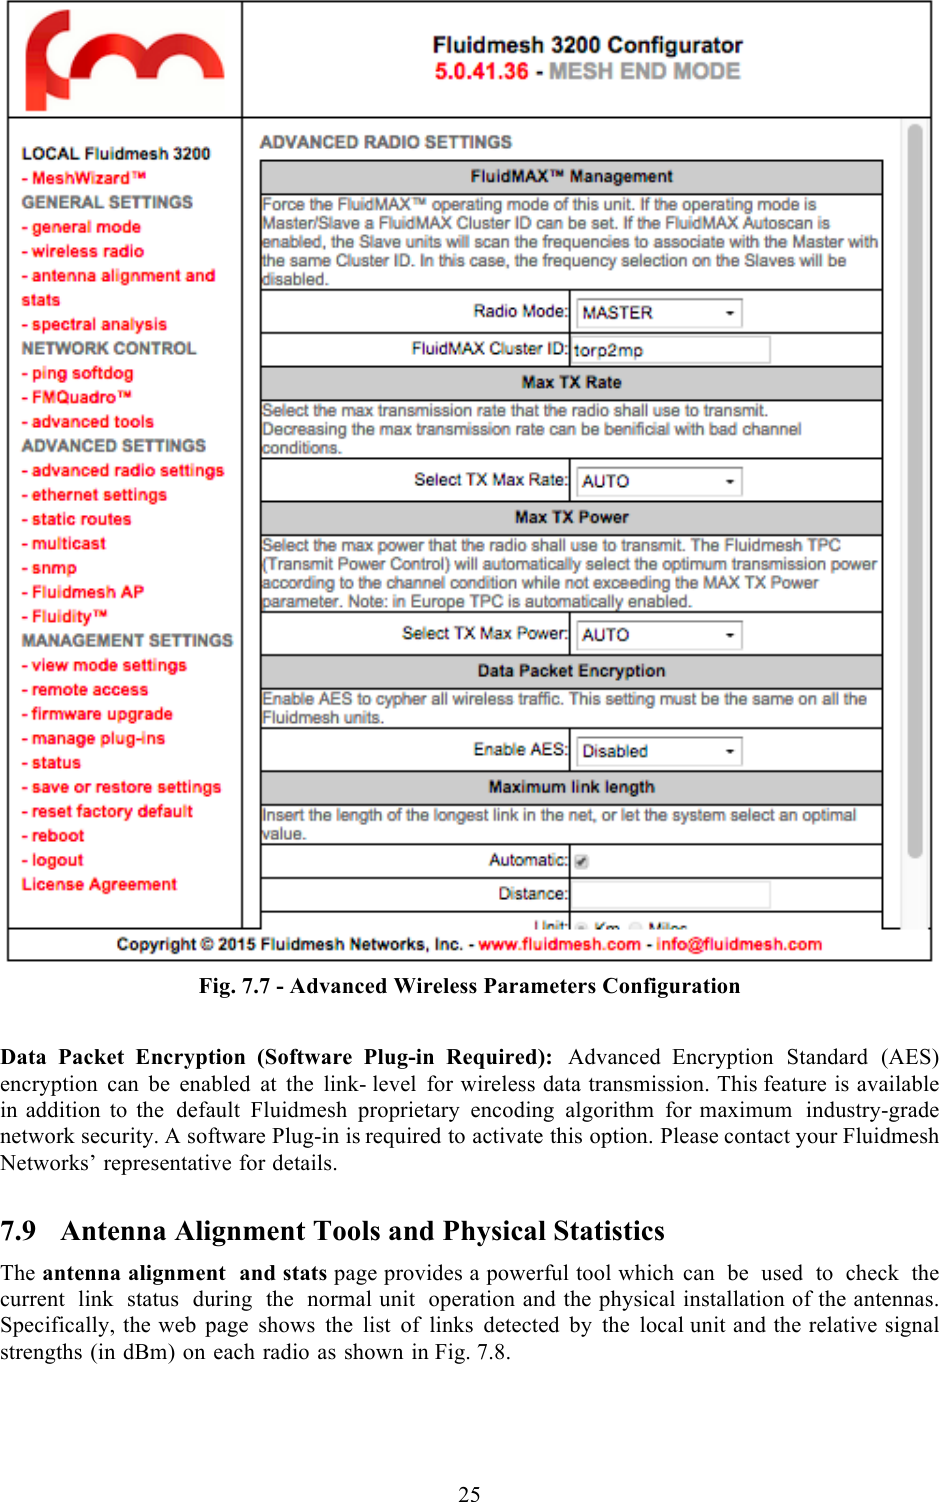  25   Fig. 7.7 - Advanced Wireless Parameters Configuration  Data Packet Encryption (Software Plug-in Required): Advanced Encryption Standard (AES) encryption can be enabled at the link- level for wireless data transmission. This feature is available in addition to the default Fluidmesh proprietary encoding algorithm for maximum industry-grade network security. A software Plug-in is required to activate this option. Please contact your Fluidmesh Networks’ representative for details. 7.9 Antenna Alignment Tools and Physical Statistics The antenna alignment and stats page provides a powerful tool which can be used to check the current link status during the normal unit operation and the physical installation of the antennas. Specifically, the web page shows the list of links detected by the local unit and the relative signal strengths (in dBm) on each radio as shown in Fig. 7.8.  